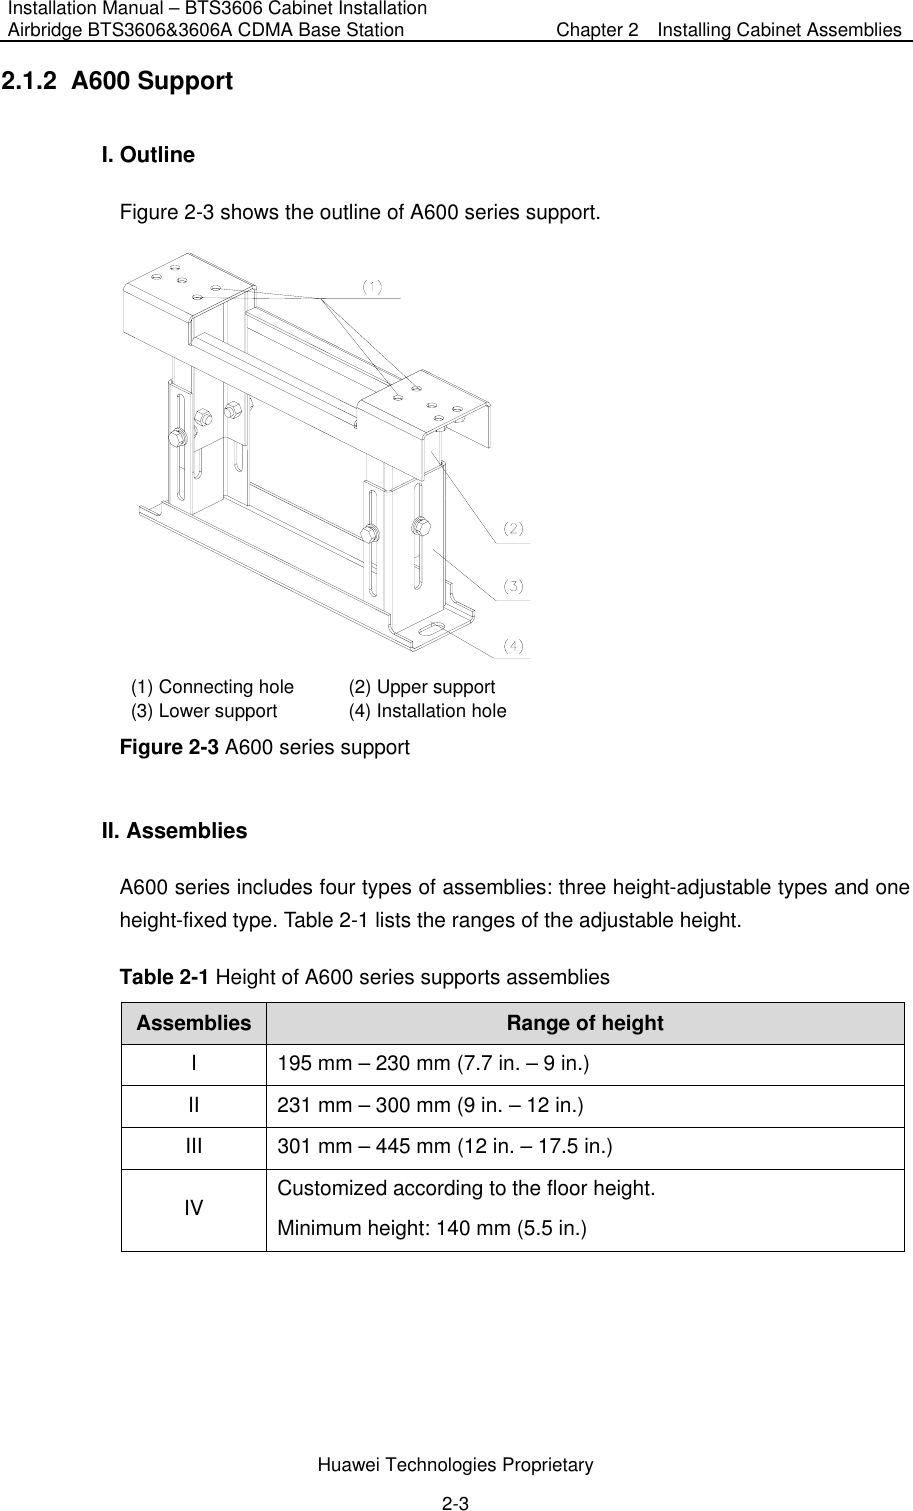 Installation Manual – BTS3606 Cabinet Installation Airbridge BTS3606&amp;3606A CDMA Base Station  Chapter 2    Installing Cabinet Assemblies  Huawei Technologies Proprietary 2-3 2.1.2  A600 Support I. Outline Figure 2-3 shows the outline of A600 series support.  (1) Connecting hole  (2) Upper support (3) Lower support  (4) Installation hole Figure 2-3 A600 series support II. Assemblies A600 series includes four types of assemblies: three height-adjustable types and one height-fixed type. Table 2-1 lists the ranges of the adjustable height. Table 2-1 Height of A600 series supports assemblies Assemblies  Range of height I  195 mm – 230 mm (7.7 in. – 9 in.) II  231 mm – 300 mm (9 in. – 12 in.) III  301 mm – 445 mm (12 in. – 17.5 in.) IV  Customized according to the floor height. Minimum height: 140 mm (5.5 in.)  